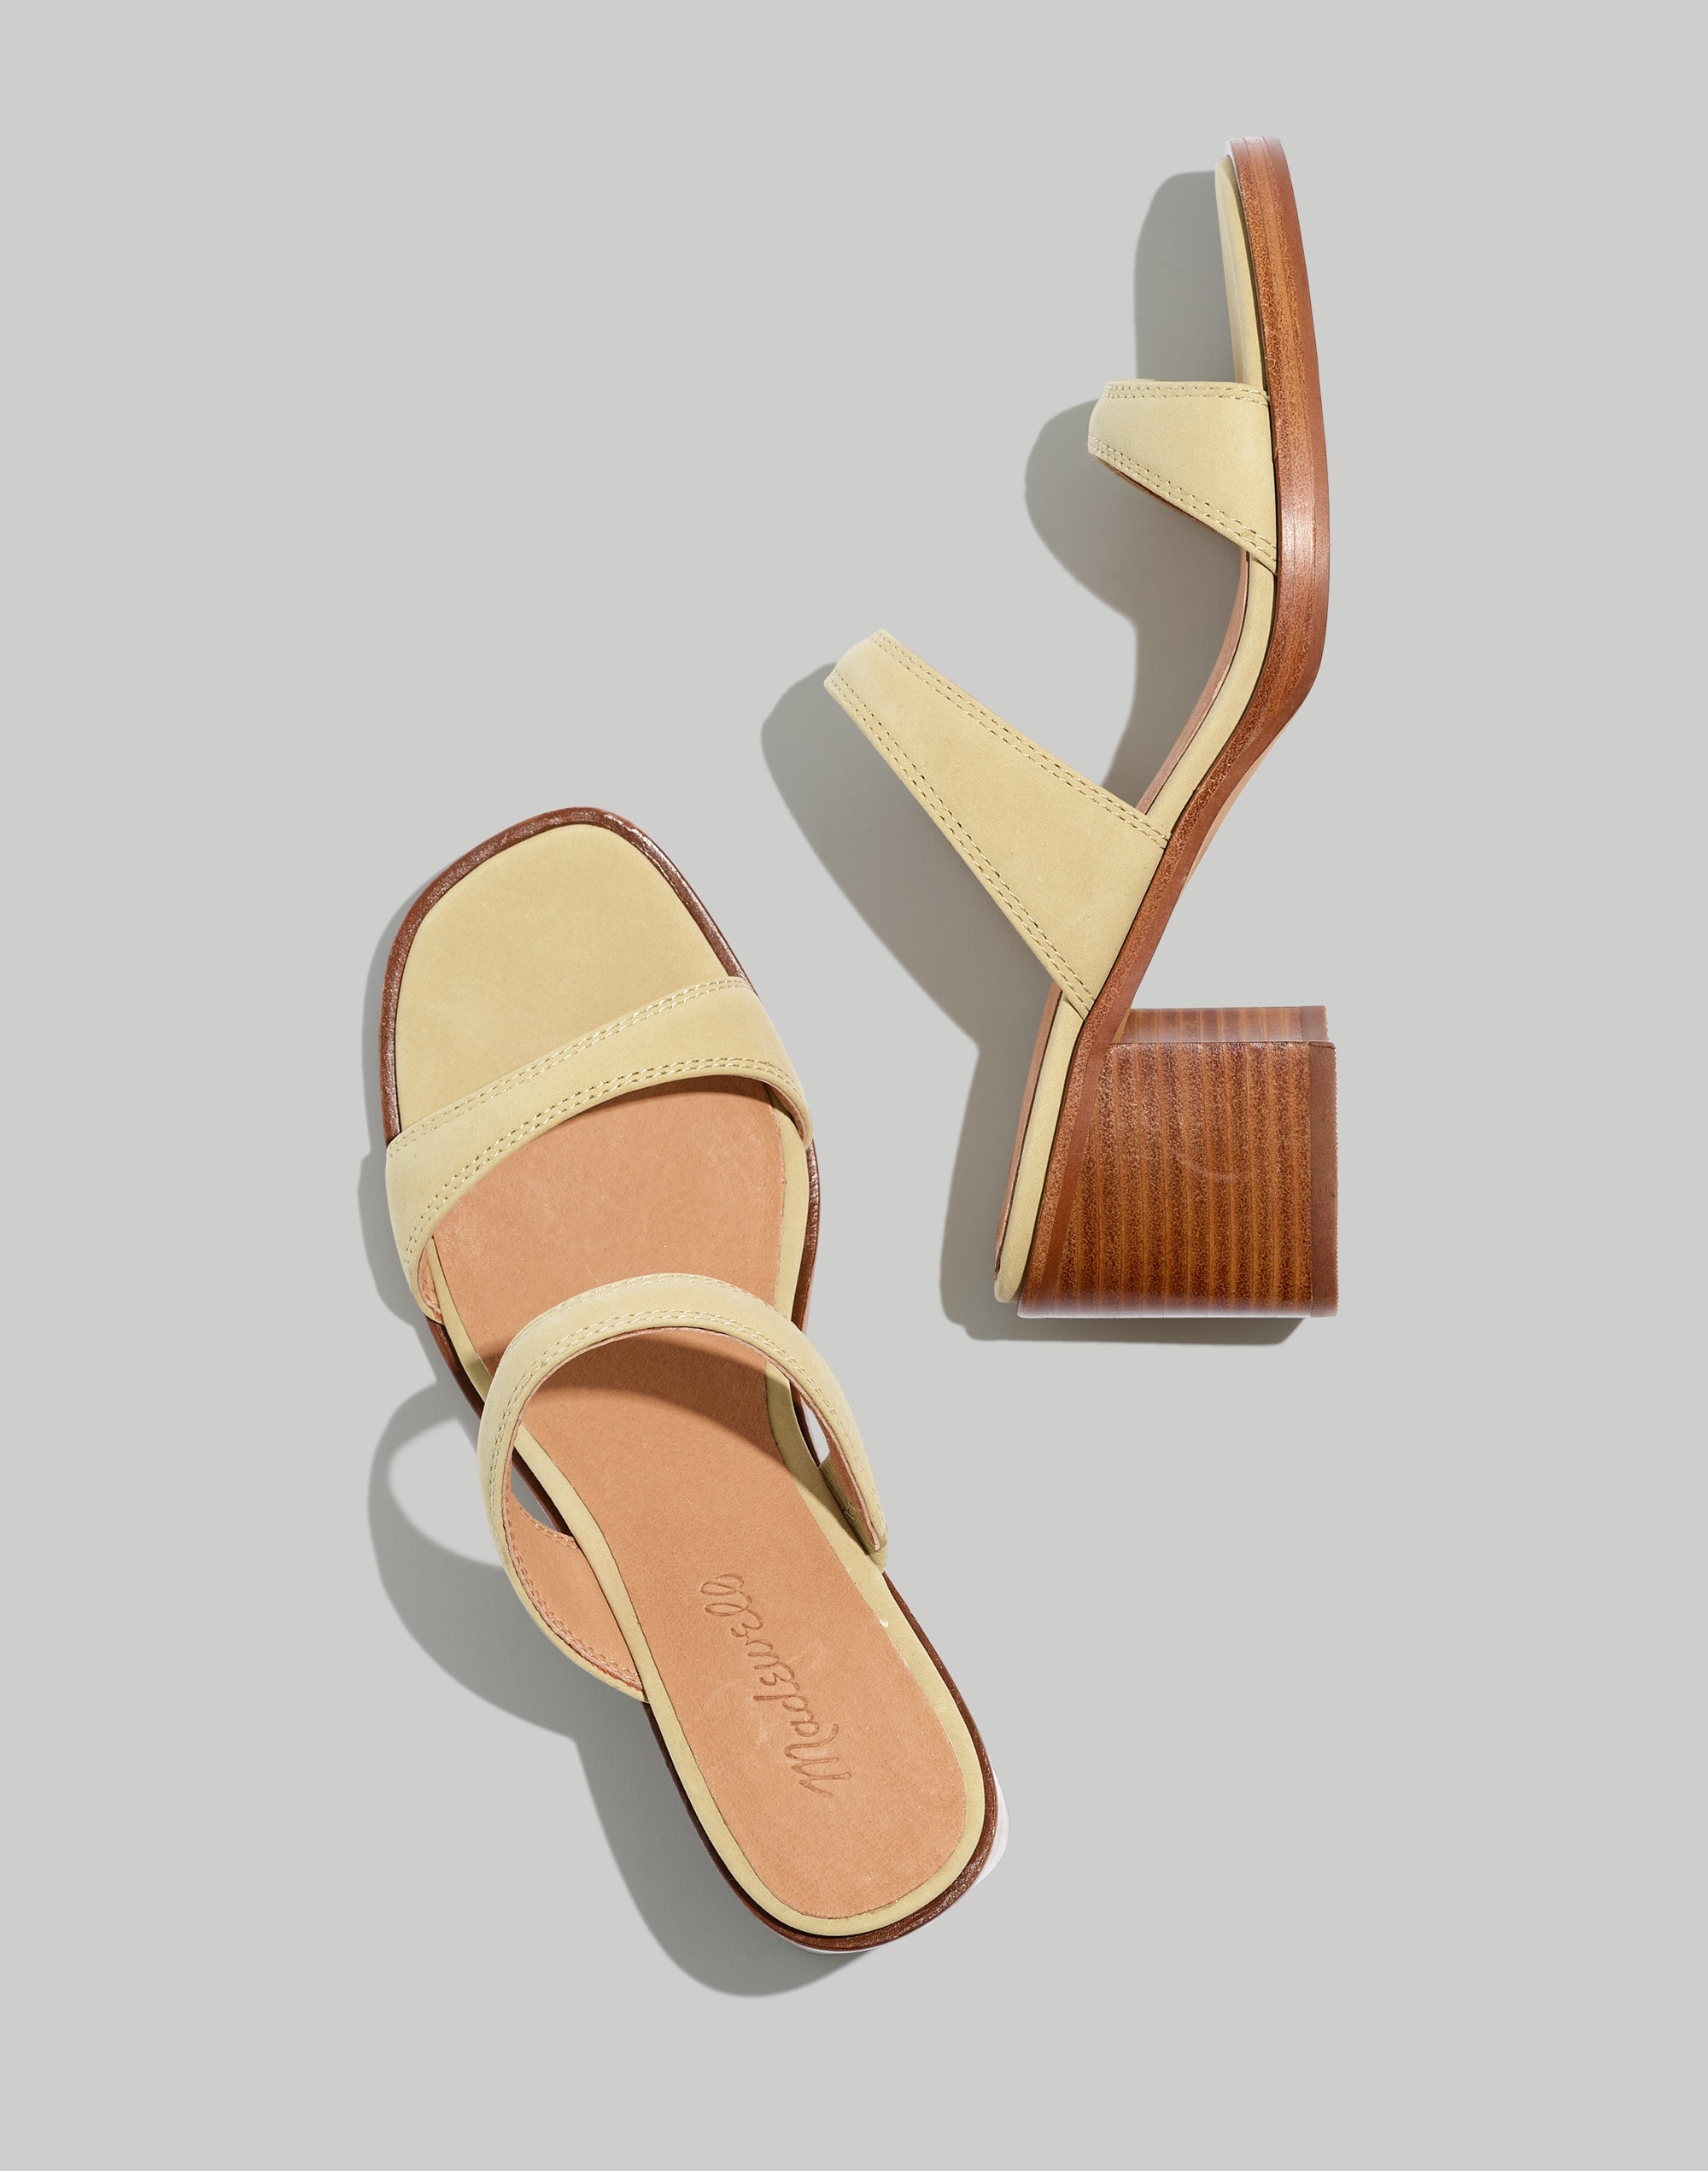 The Saige Double-Strap Sandal in Leather | Madewell